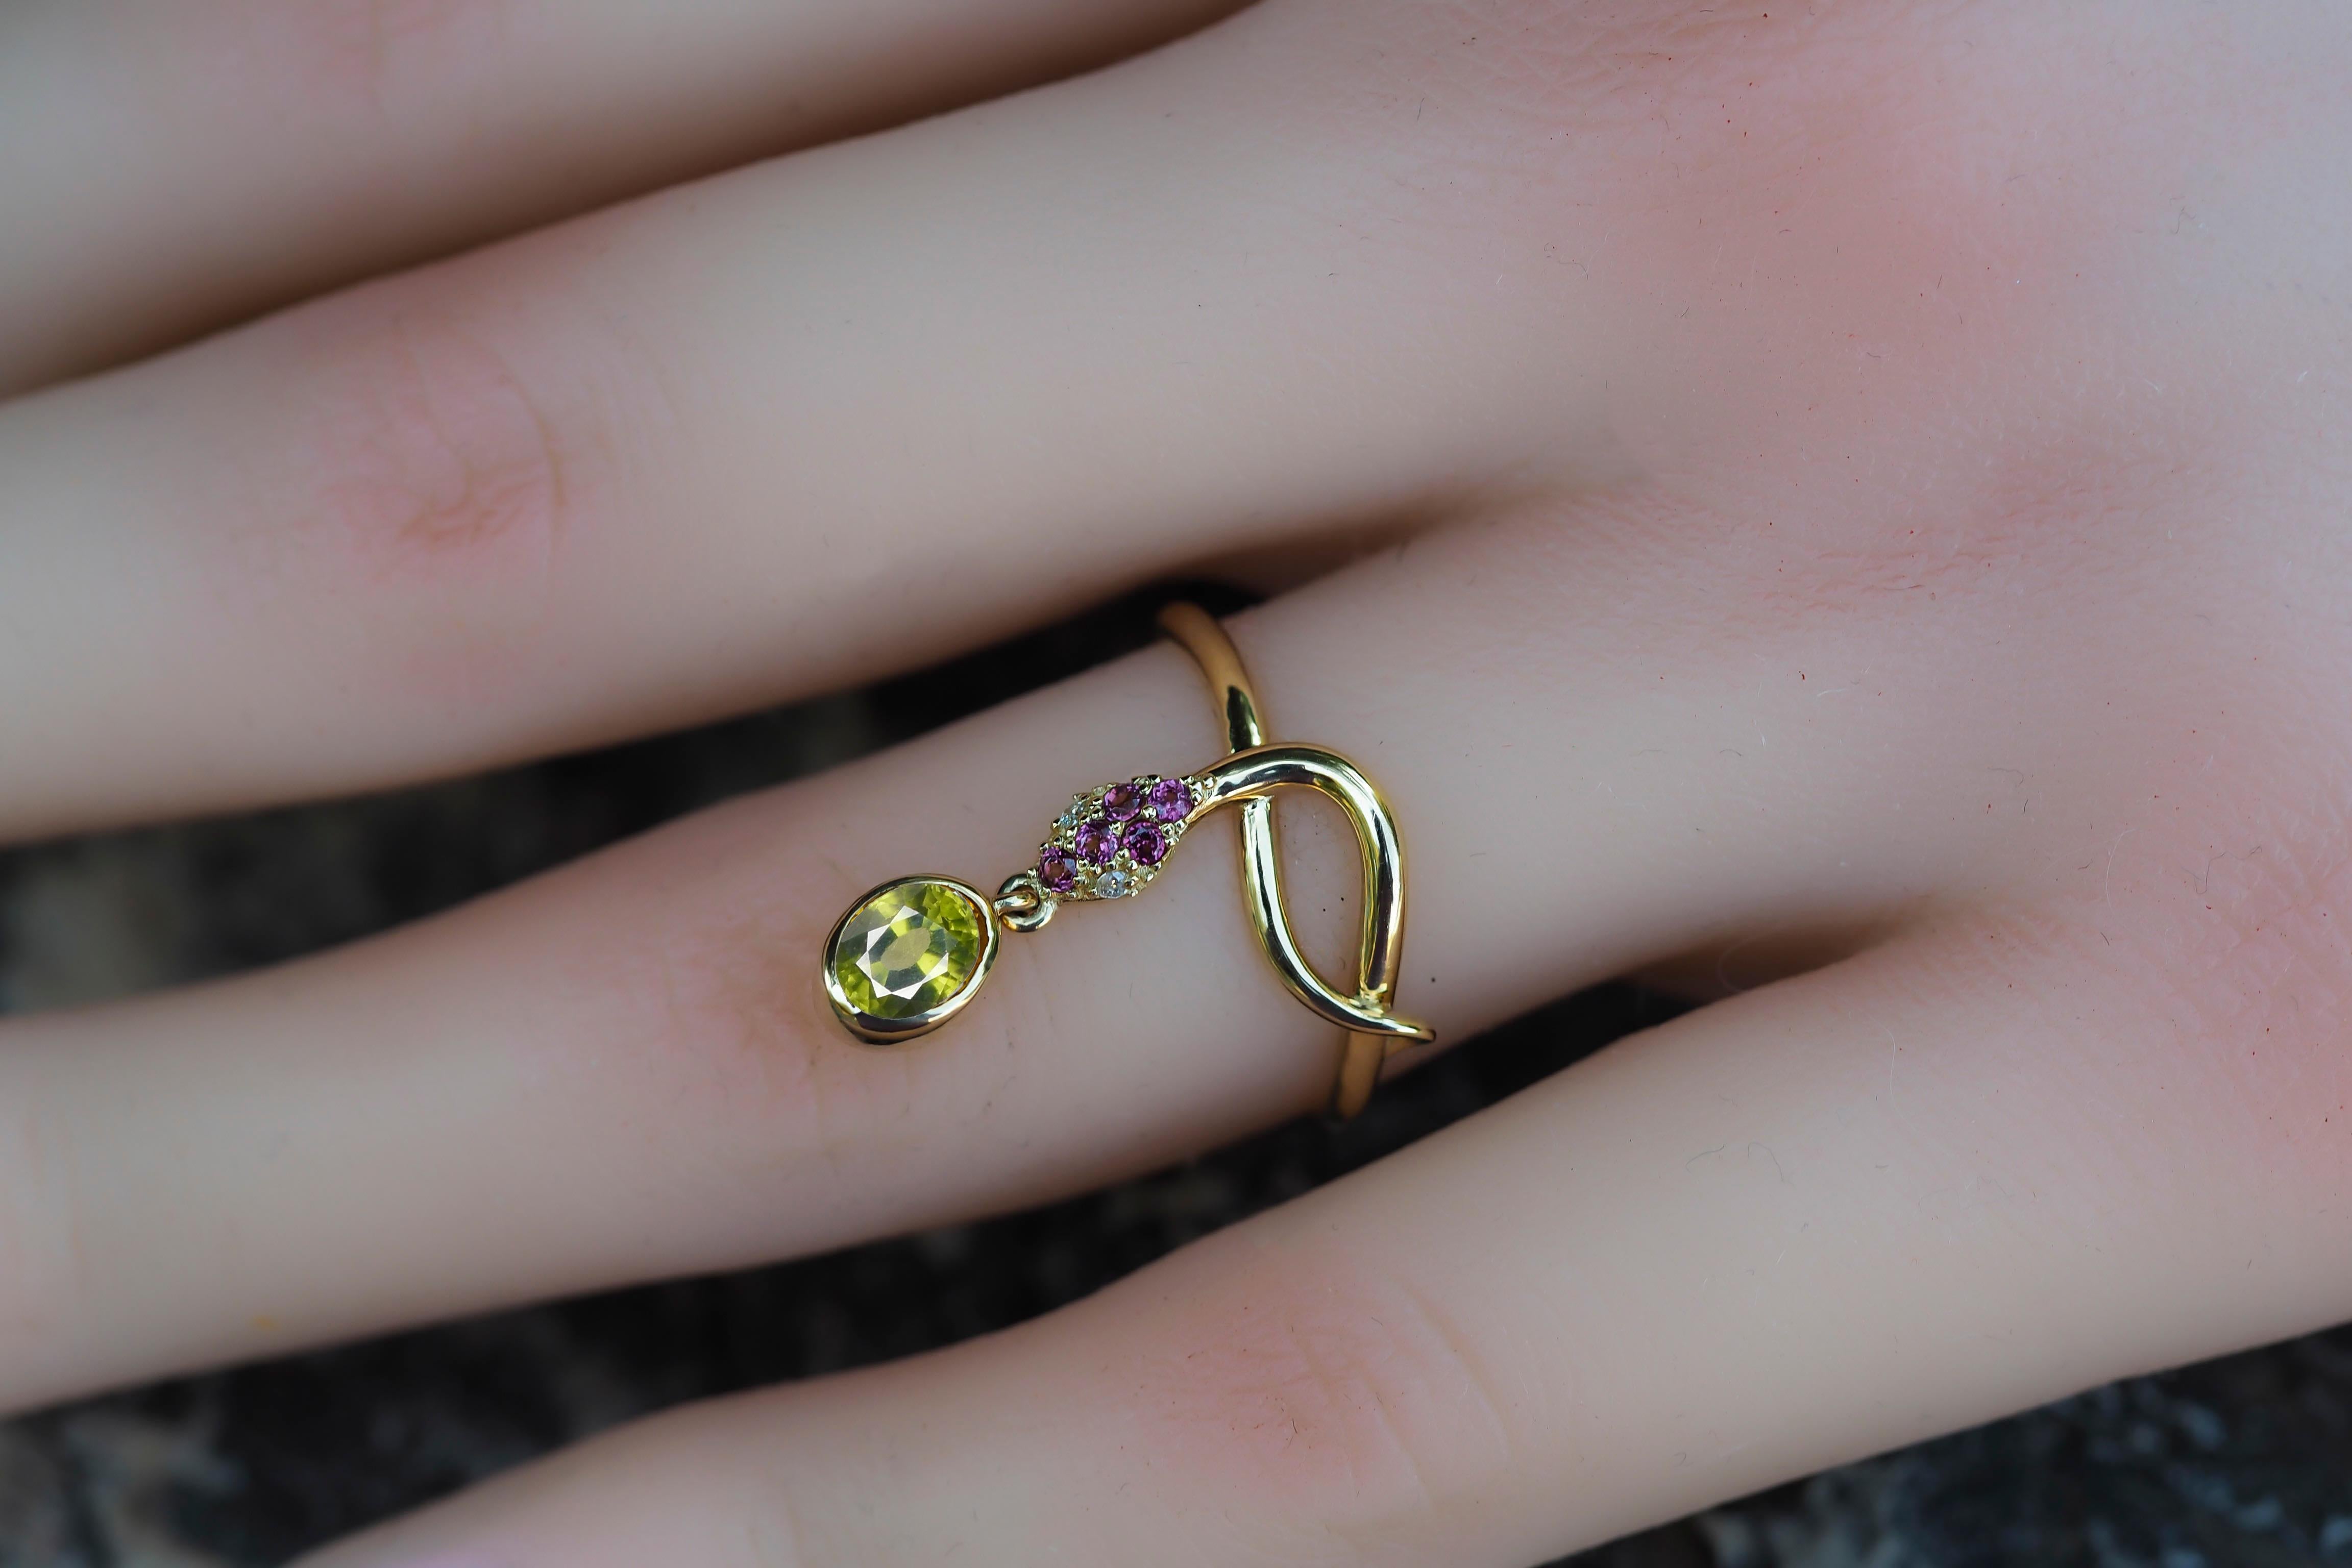 Snake ring with Peridot. 
Peridot gold ring. Snake gold ring. Genuine Peridot ring. Oval Peridot ring. October birthstone ring.

Metal: 14k gold.
Weight: 2.25 g. depends from size.

Gemstones:
Peridot: color - apple green, olive green
Oval cut, 0.8